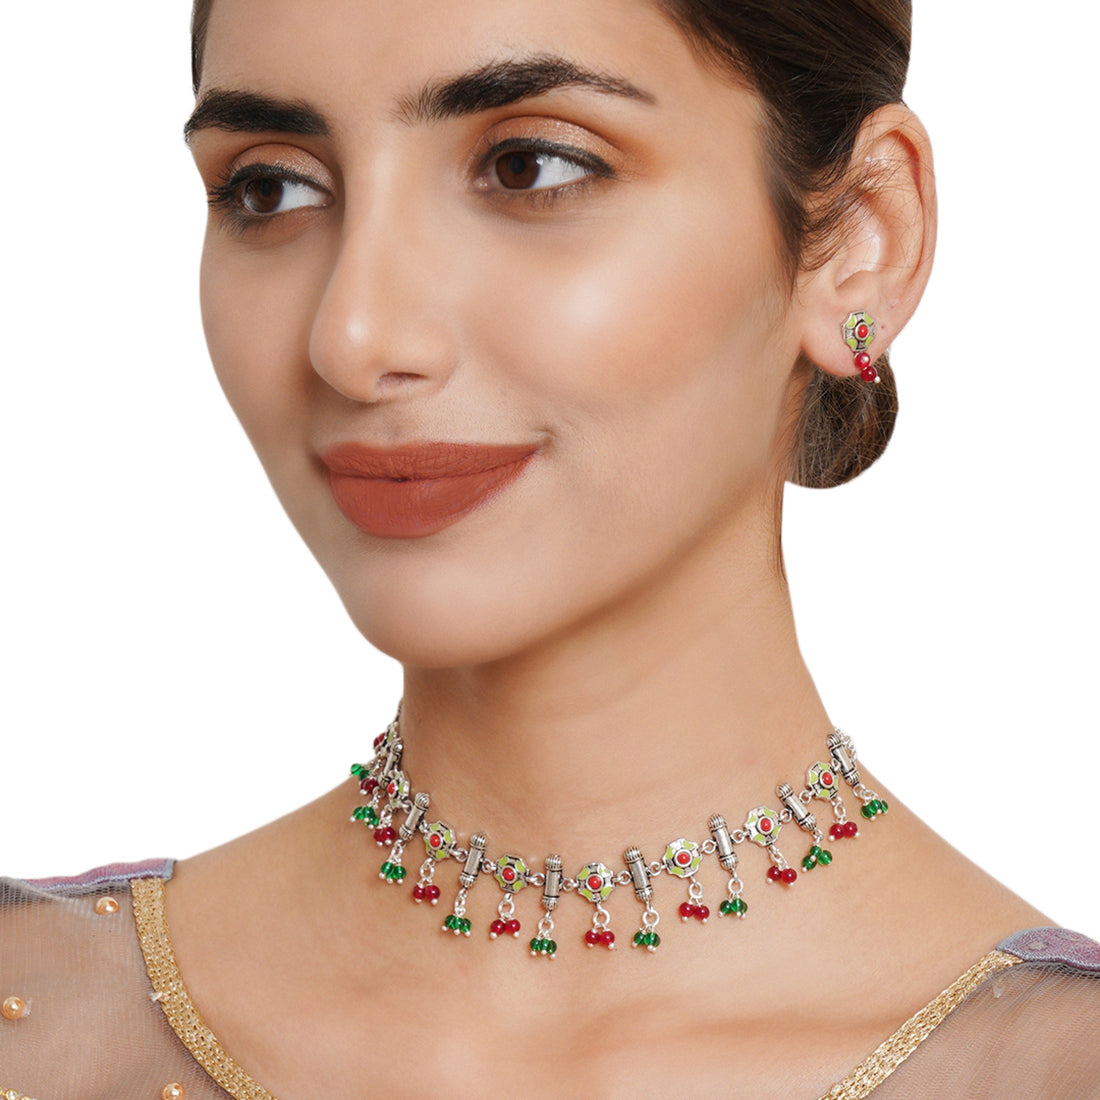 Festive Hues Intricate Enameled Choker Necklace Set with Artisanal Motifs and Green Beads